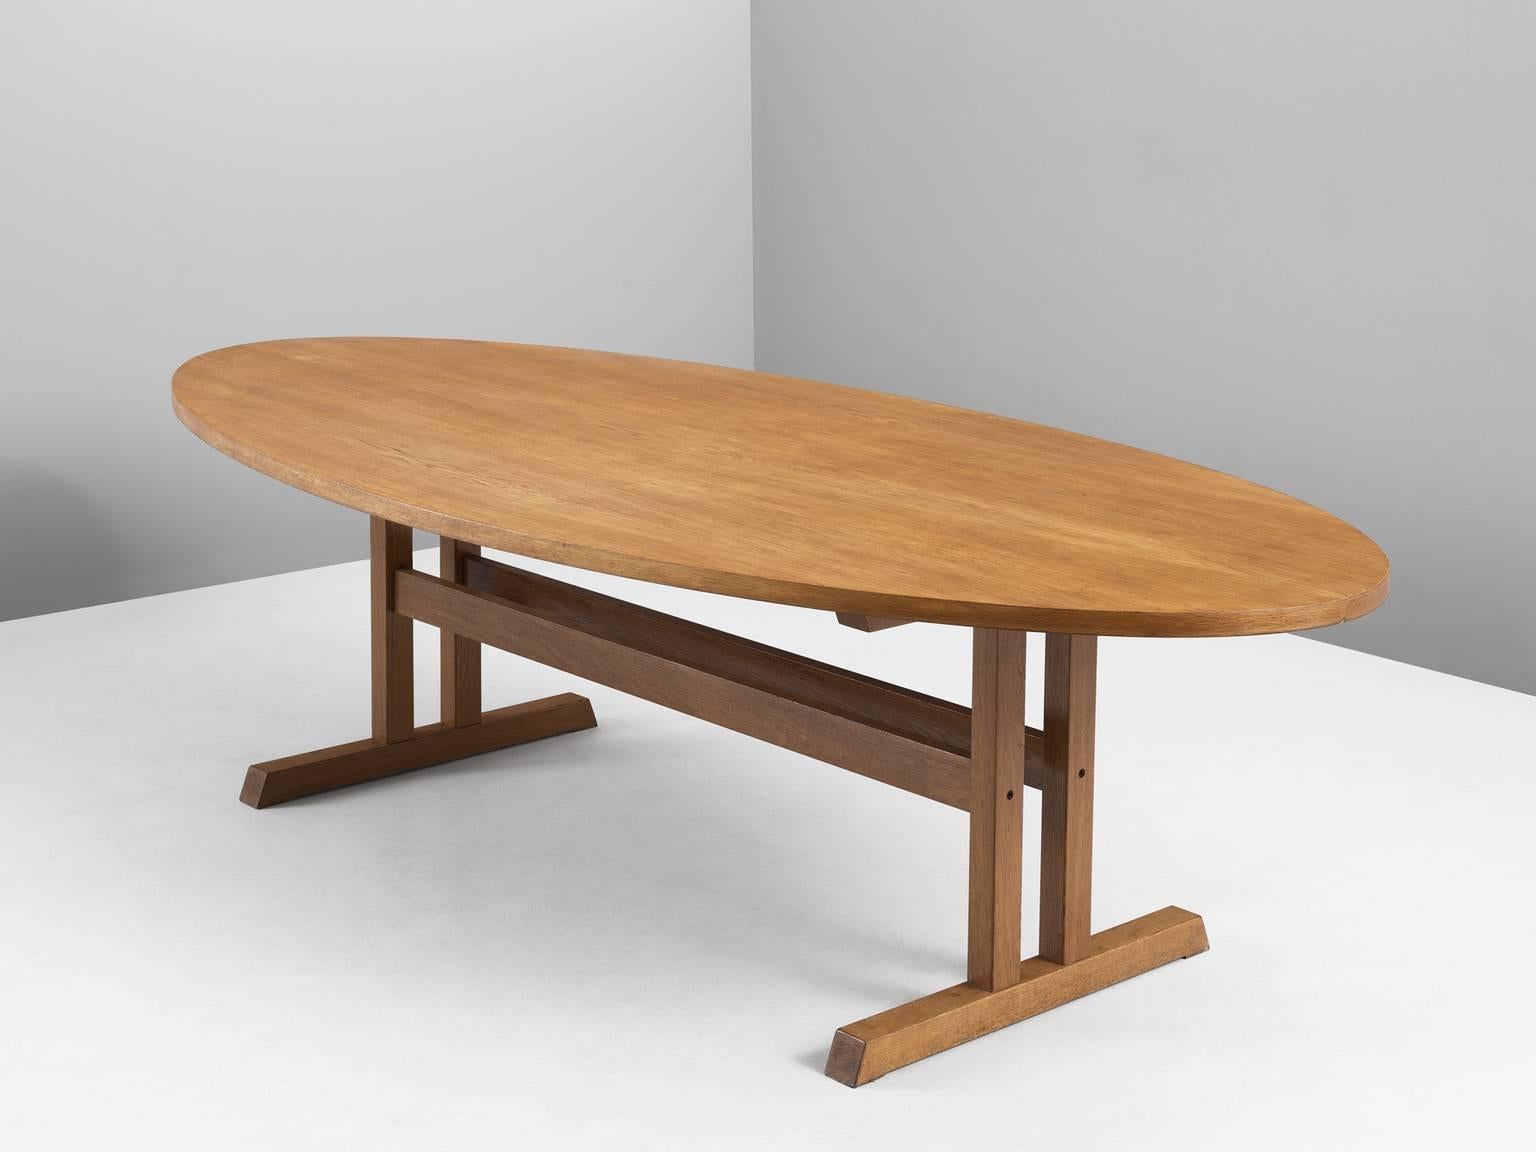 Dining table, in oak, Denmark 1960s. 

Oval dining table in blond oak. The table consist of a two leg base with cross-connections. The base is doubled with two sled feet. An oval shaped top shows the beautiful grain of the oak and emphasizes the